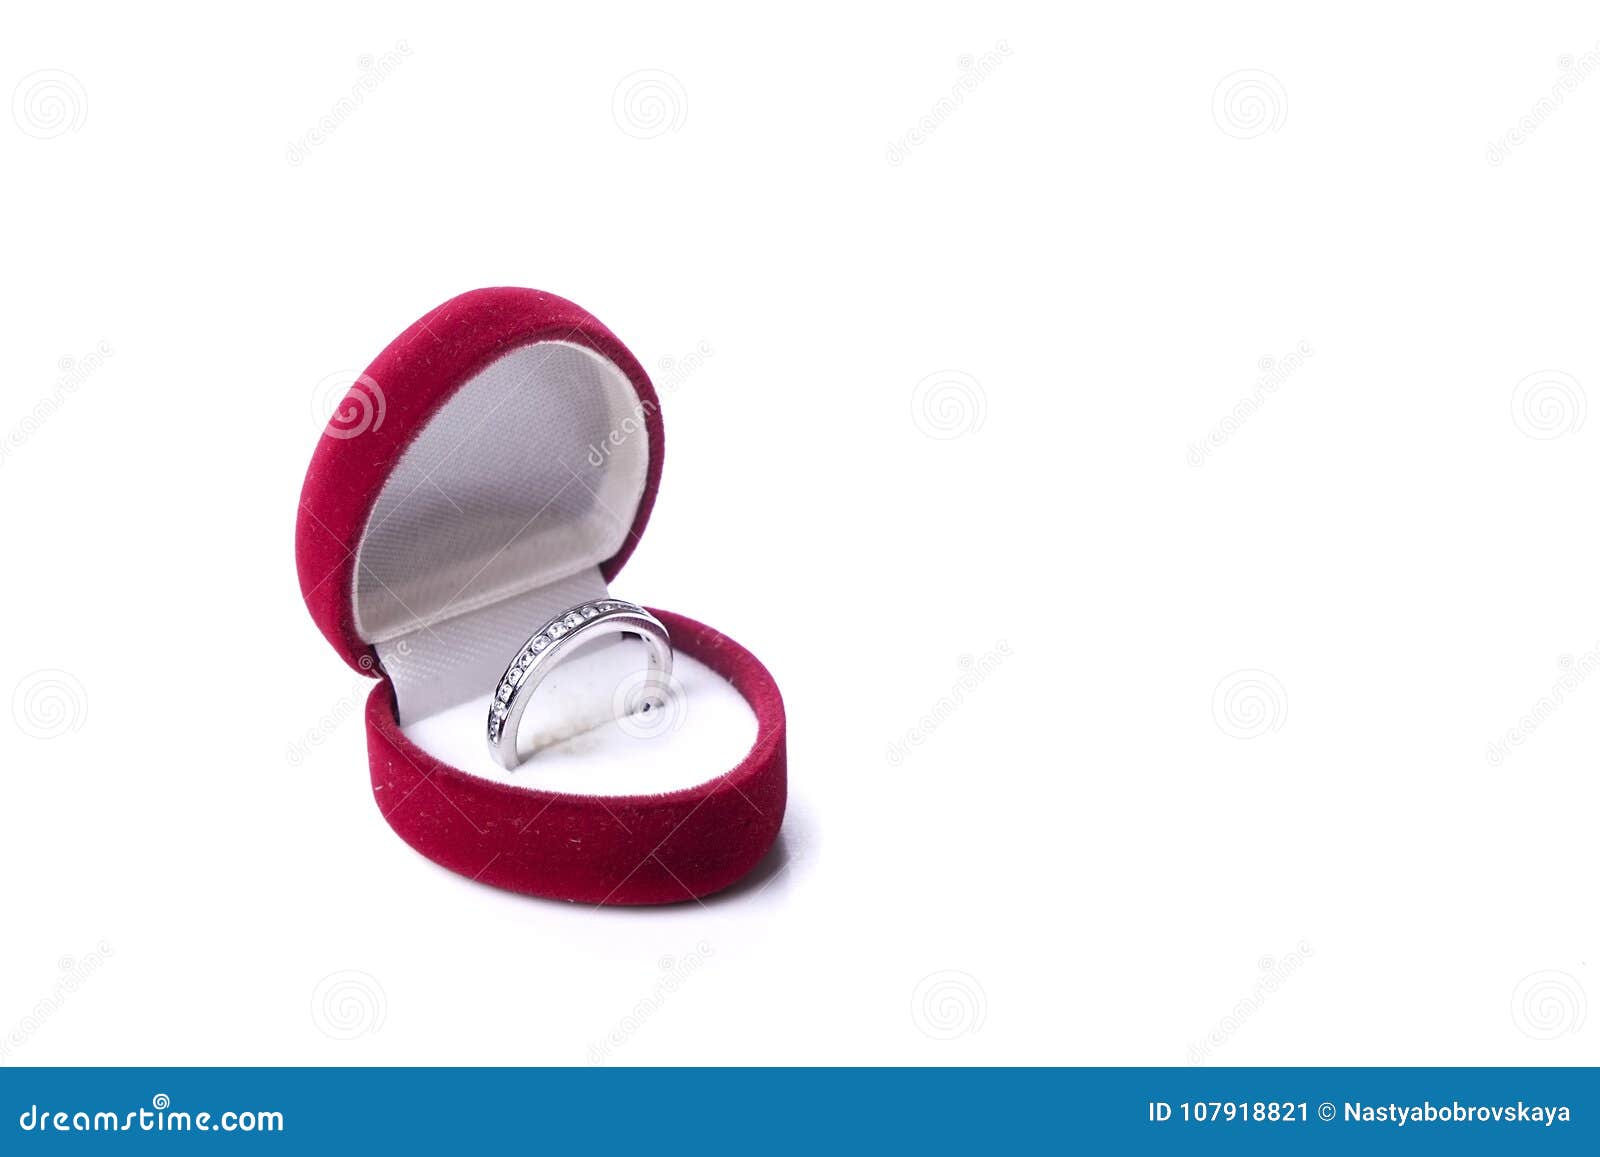 Happy Valentines Day Marry Me Present For Loved Woman Stock Image Image Of Container Jewellery